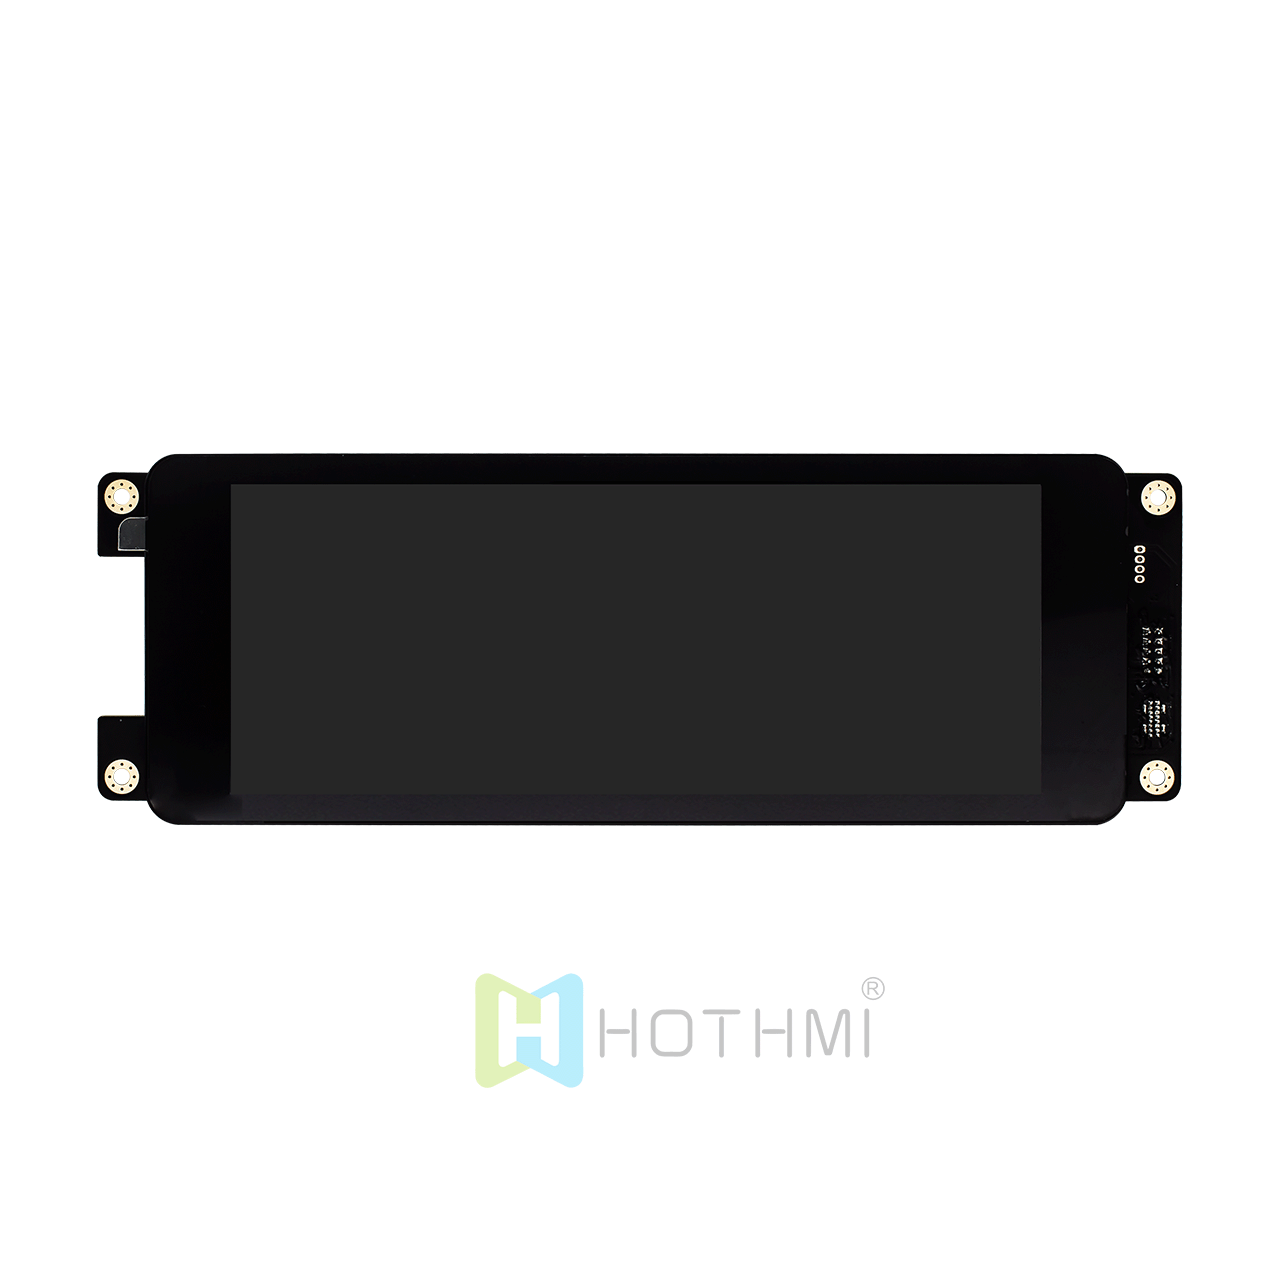 6.86-inch 480x1280 dot matrix TFT LCD display module URAT intelligent serial port screen capacitive touch screen HMI IPS sun readable and compatible with Raspberry Pi